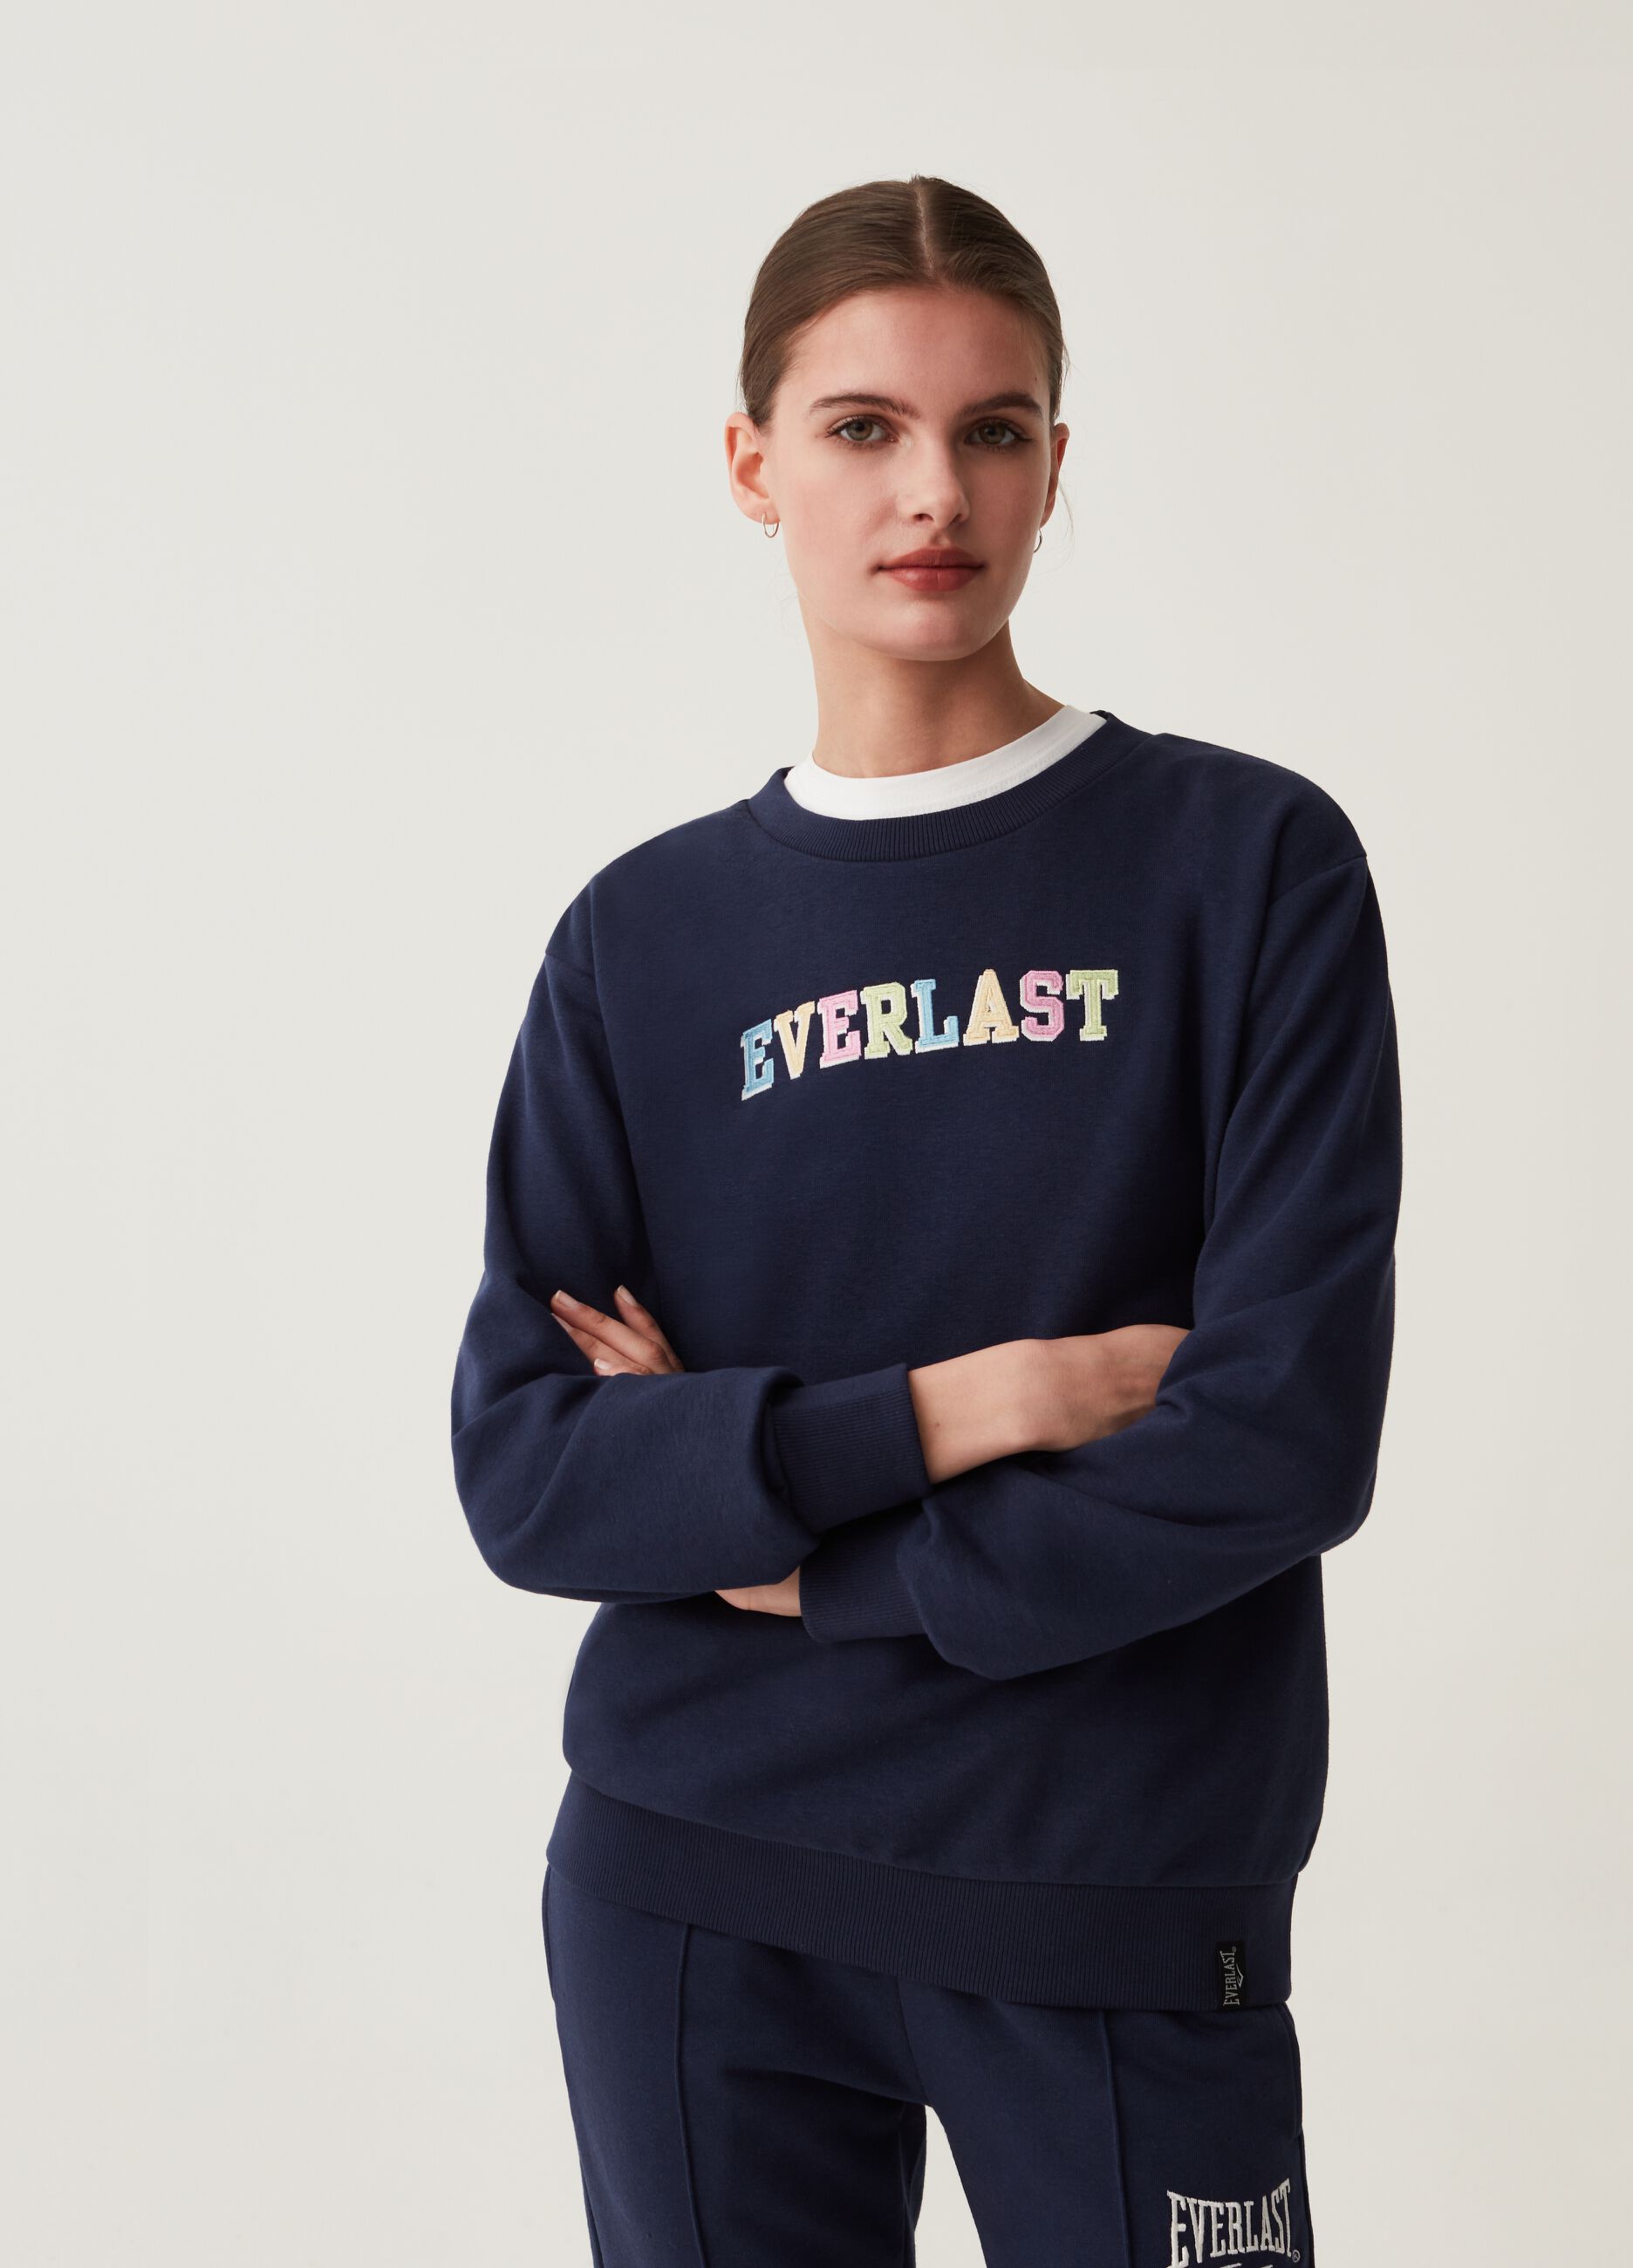 Everlast sweatshirt with embroidery and round neck